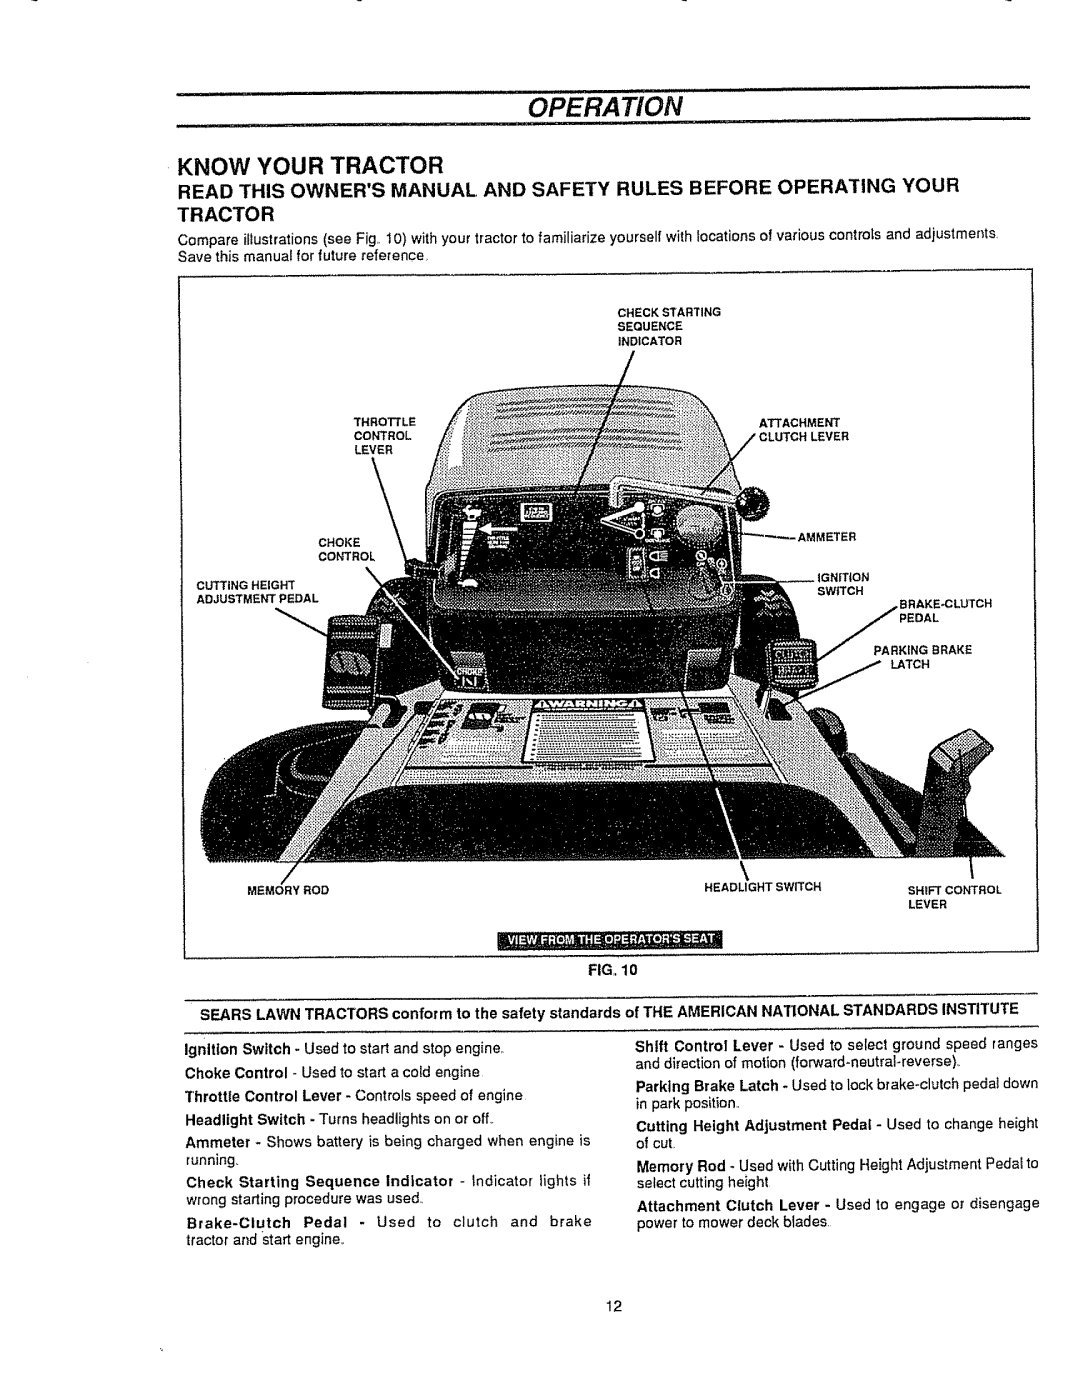 Sears 536.25587 owner manual Operation, Know Your Tractor 